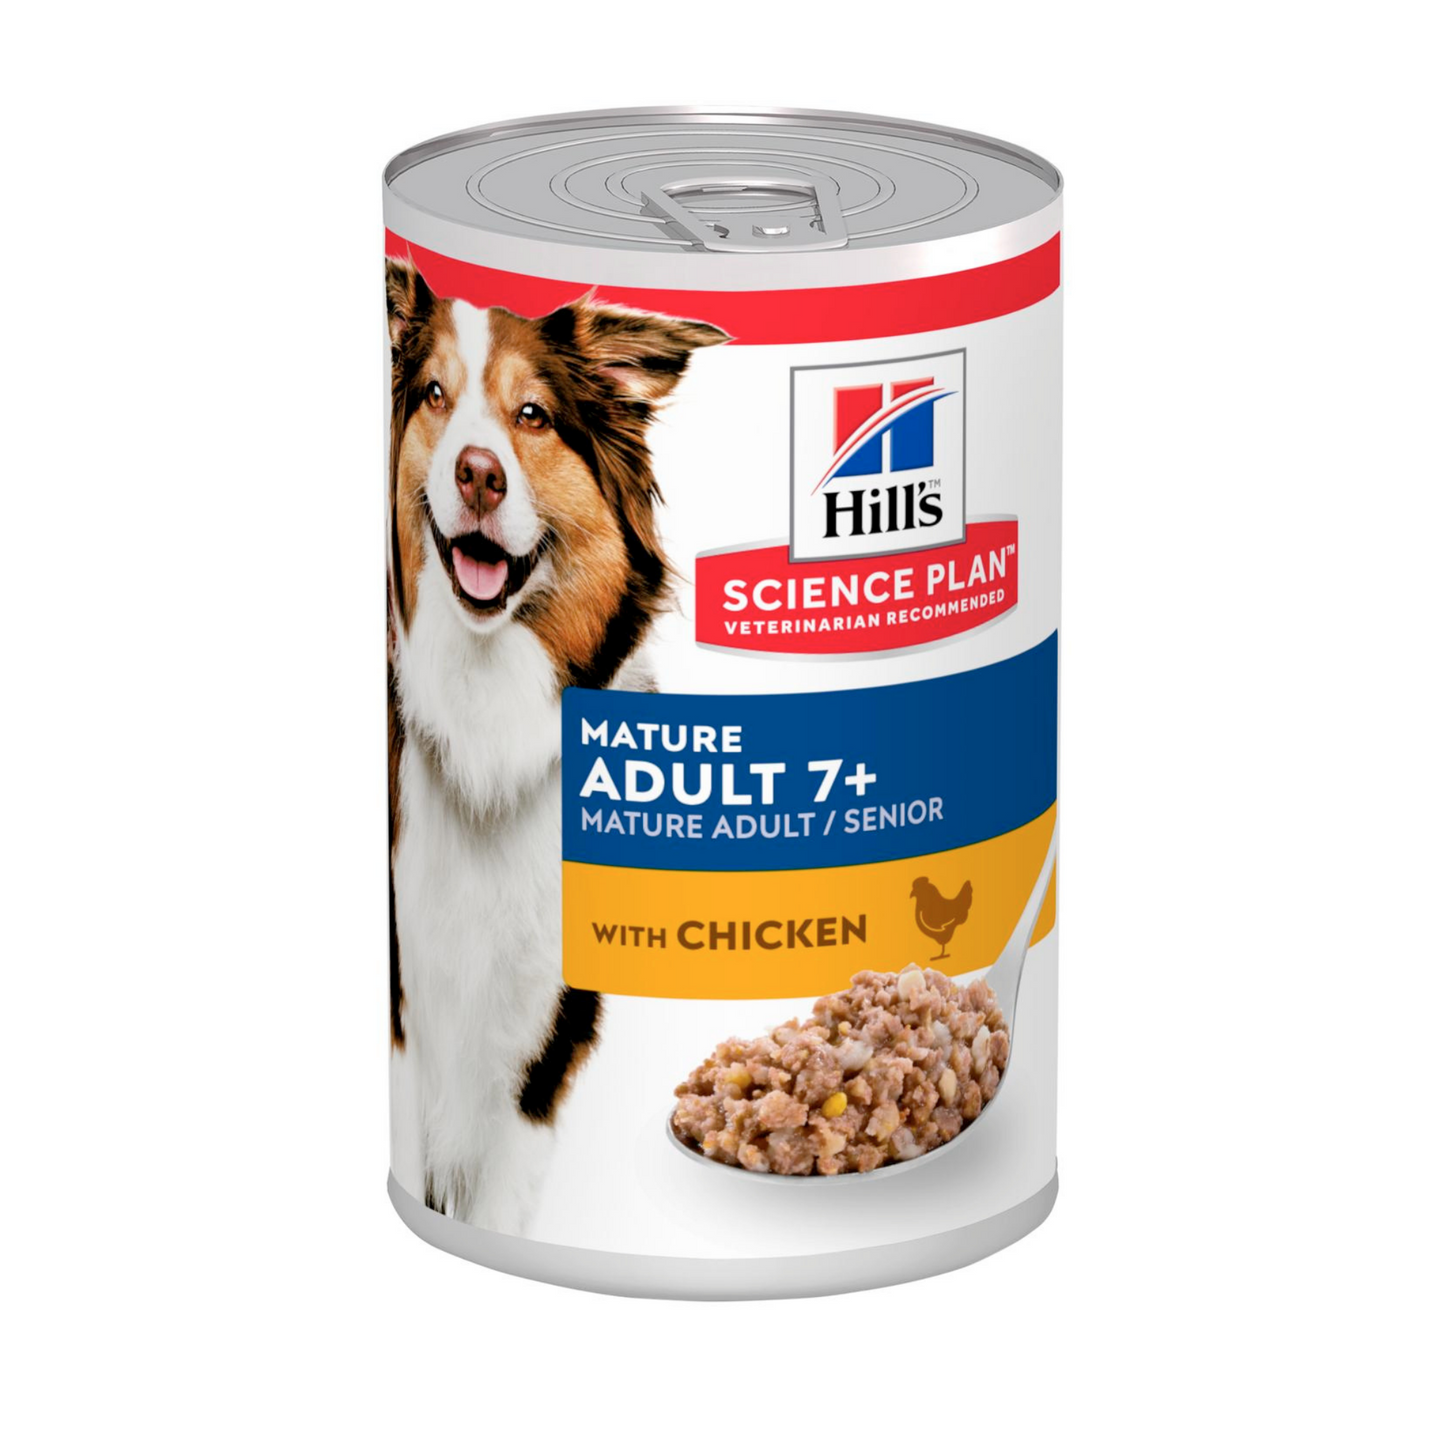 HILL'S SCIENCE PLAN Mature Adult 7+ Dog Food with Chicken - Targa Pet Shop